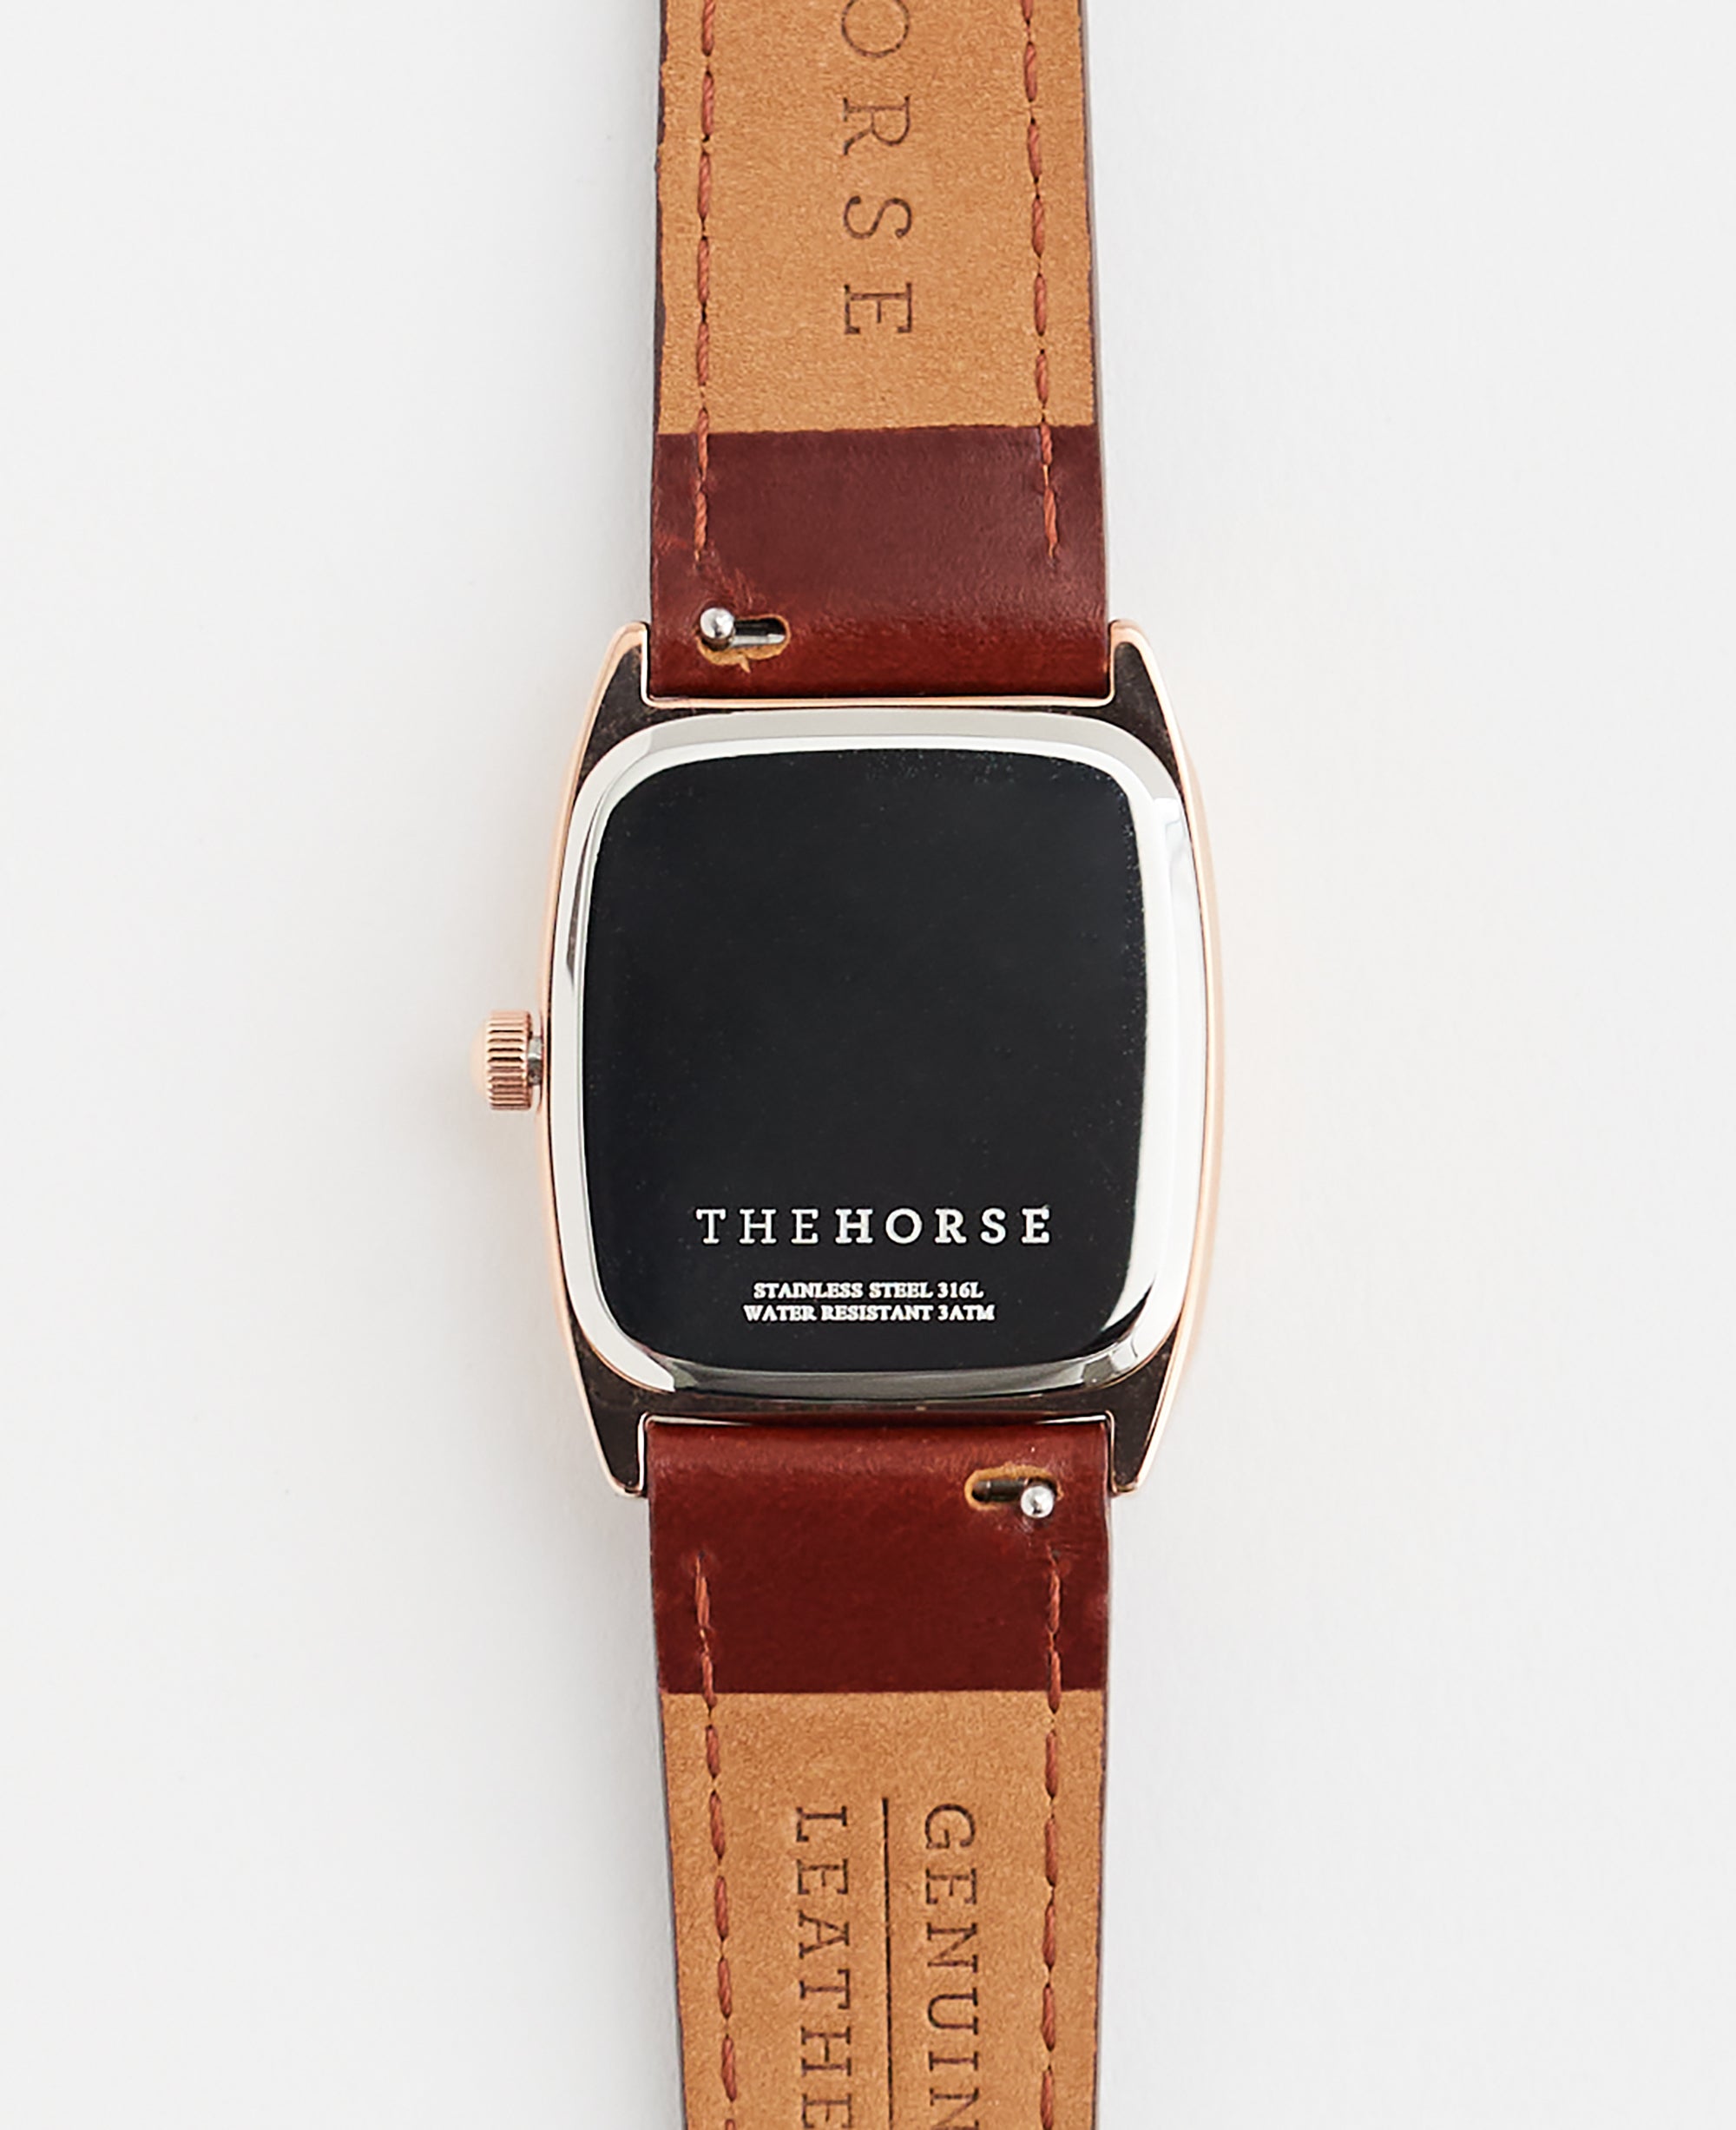 The Dress Watch: Polished Rose Gold / White Dial / Walnut Leather